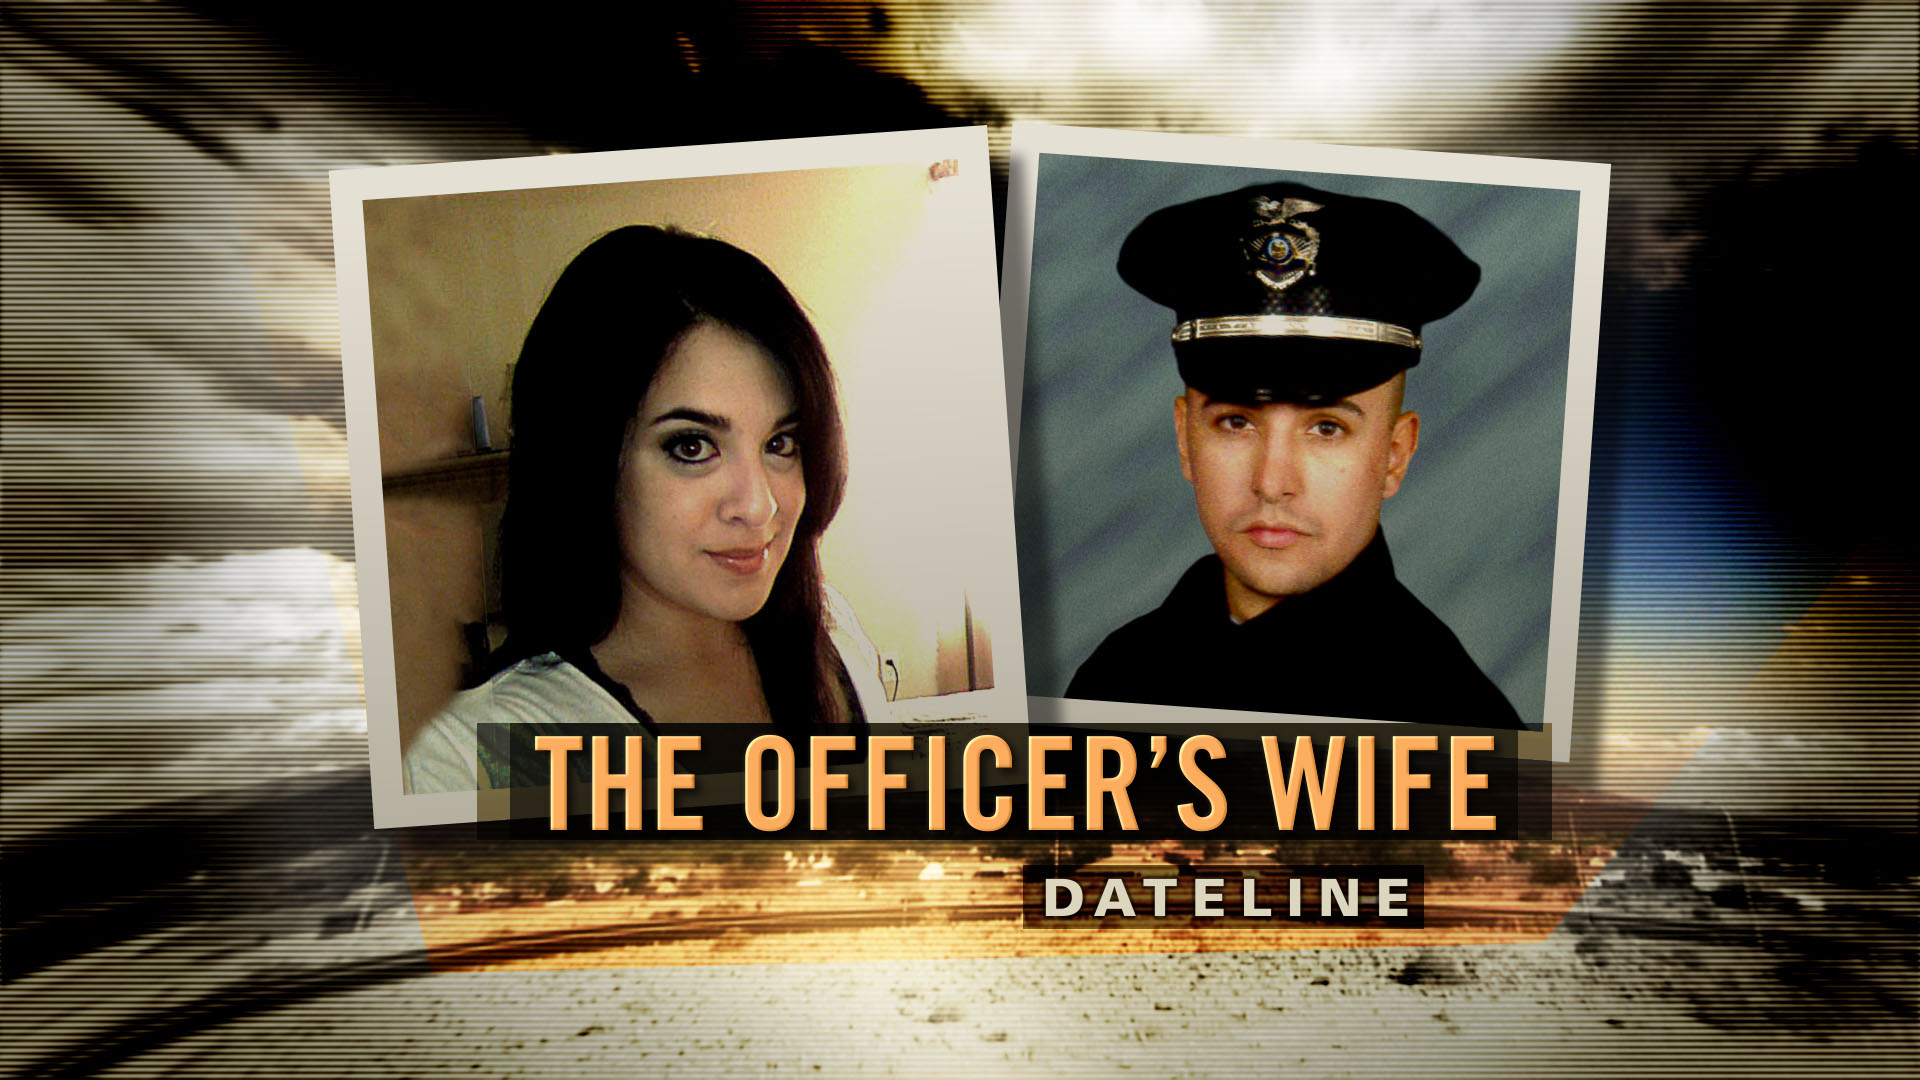 Watch Dateline Episode: The Officer's Wife 